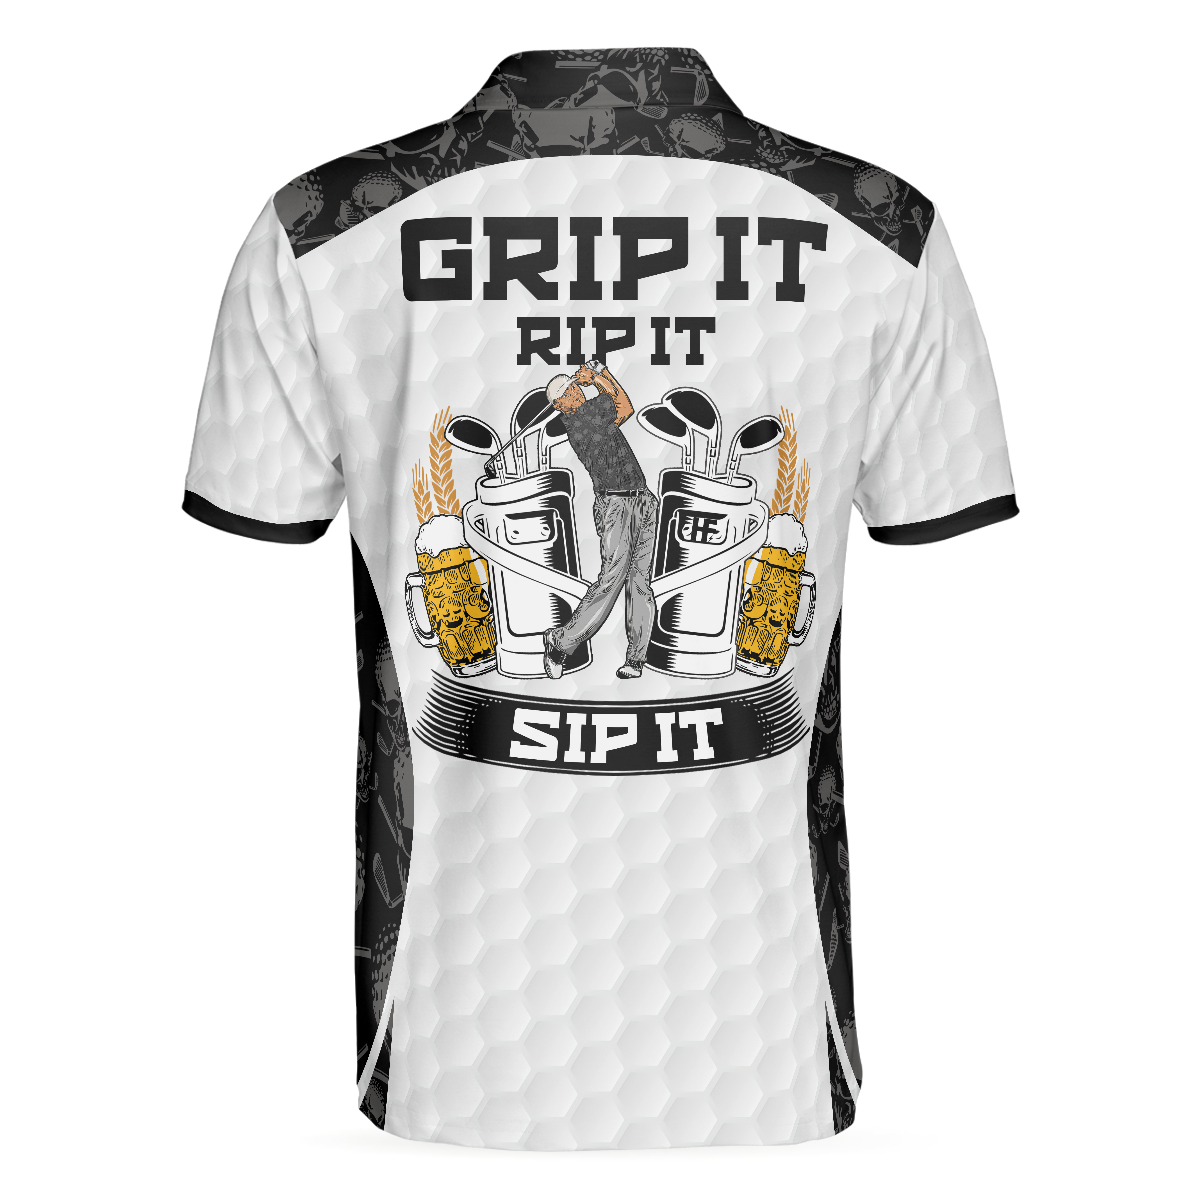 Grip It Rip It Sip It Golf White Polo Shirt Skull Pattern Shirt For Christmas Scary Gift Idea For Golfers - 2